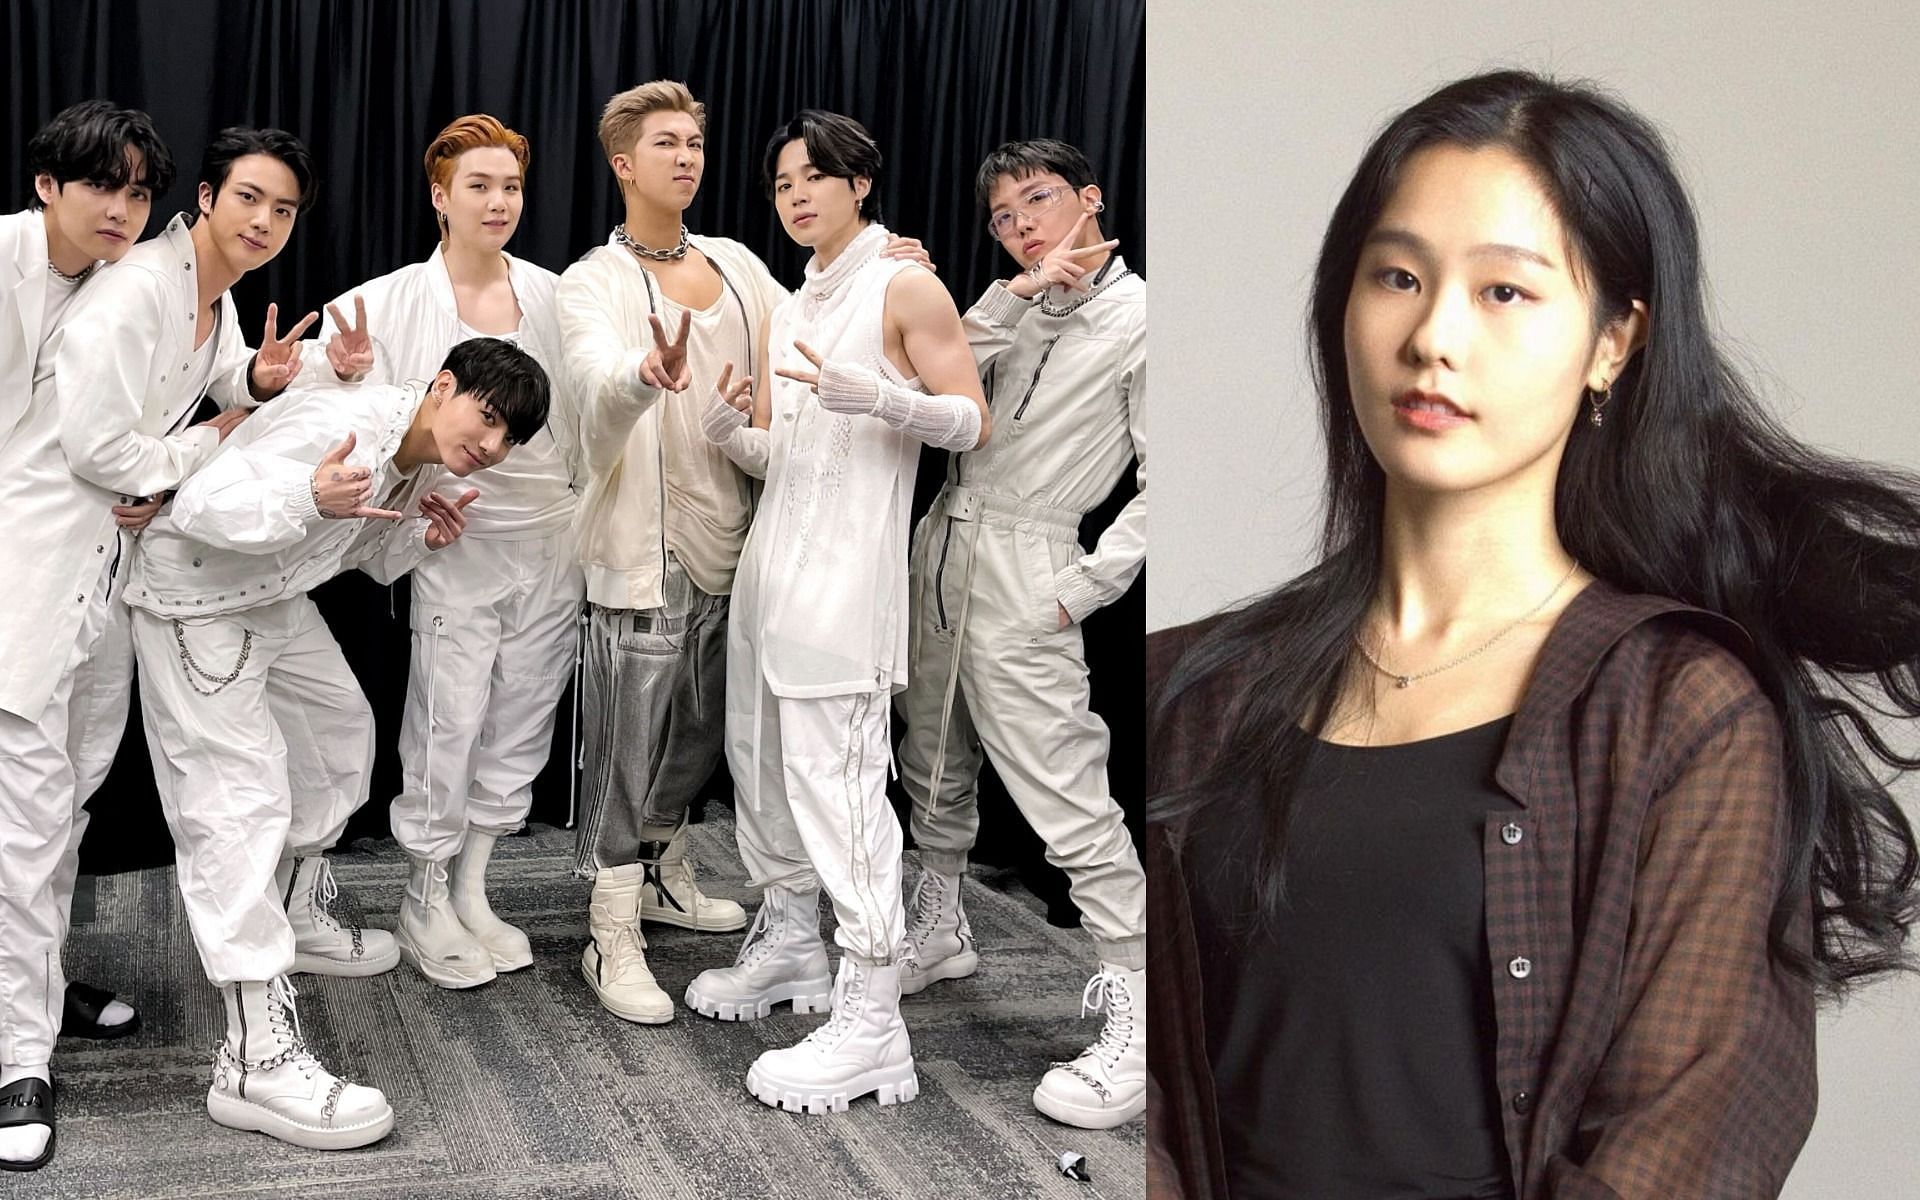 Daphne claps back at ARMYs who incorrectly assumed her ethnicity (Images via Twitter/bts_bighit and Instagram/39daph) Enter caption